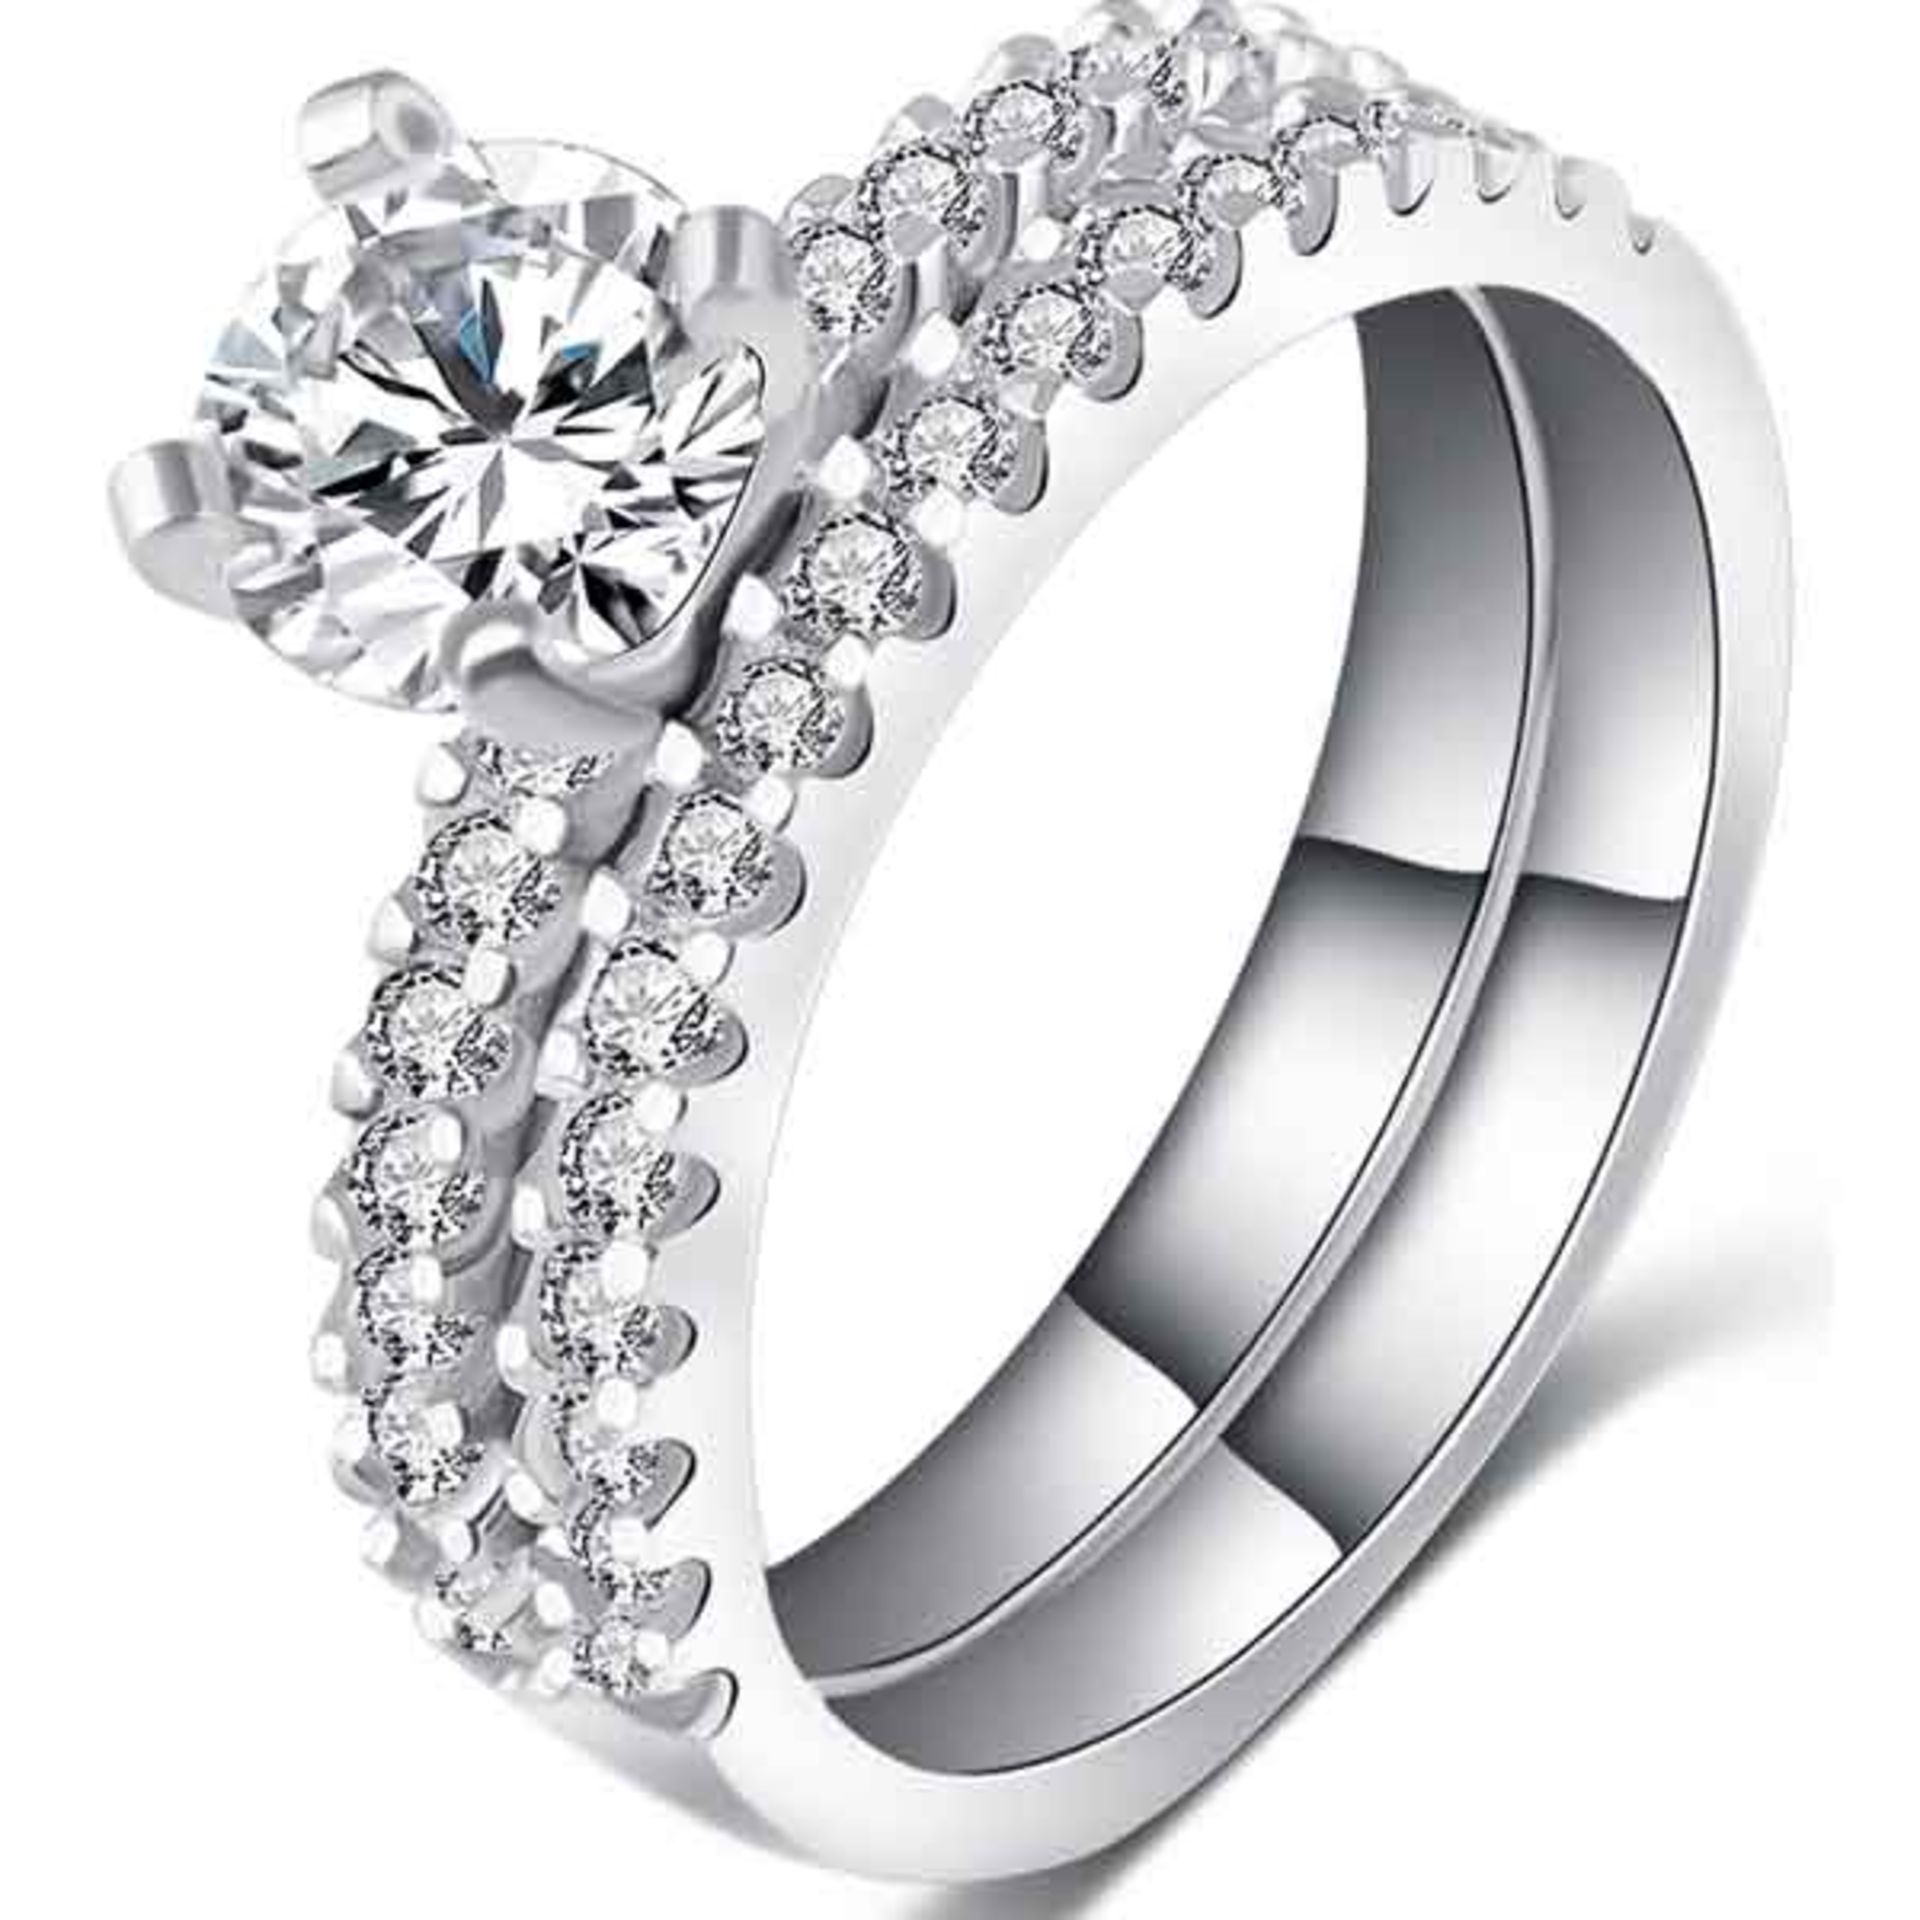 V Brand New White Gold Plated and CZ Engagement Ring Set X 2 YOUR BID PRICE TO BE MULTIPLIED BY TWO